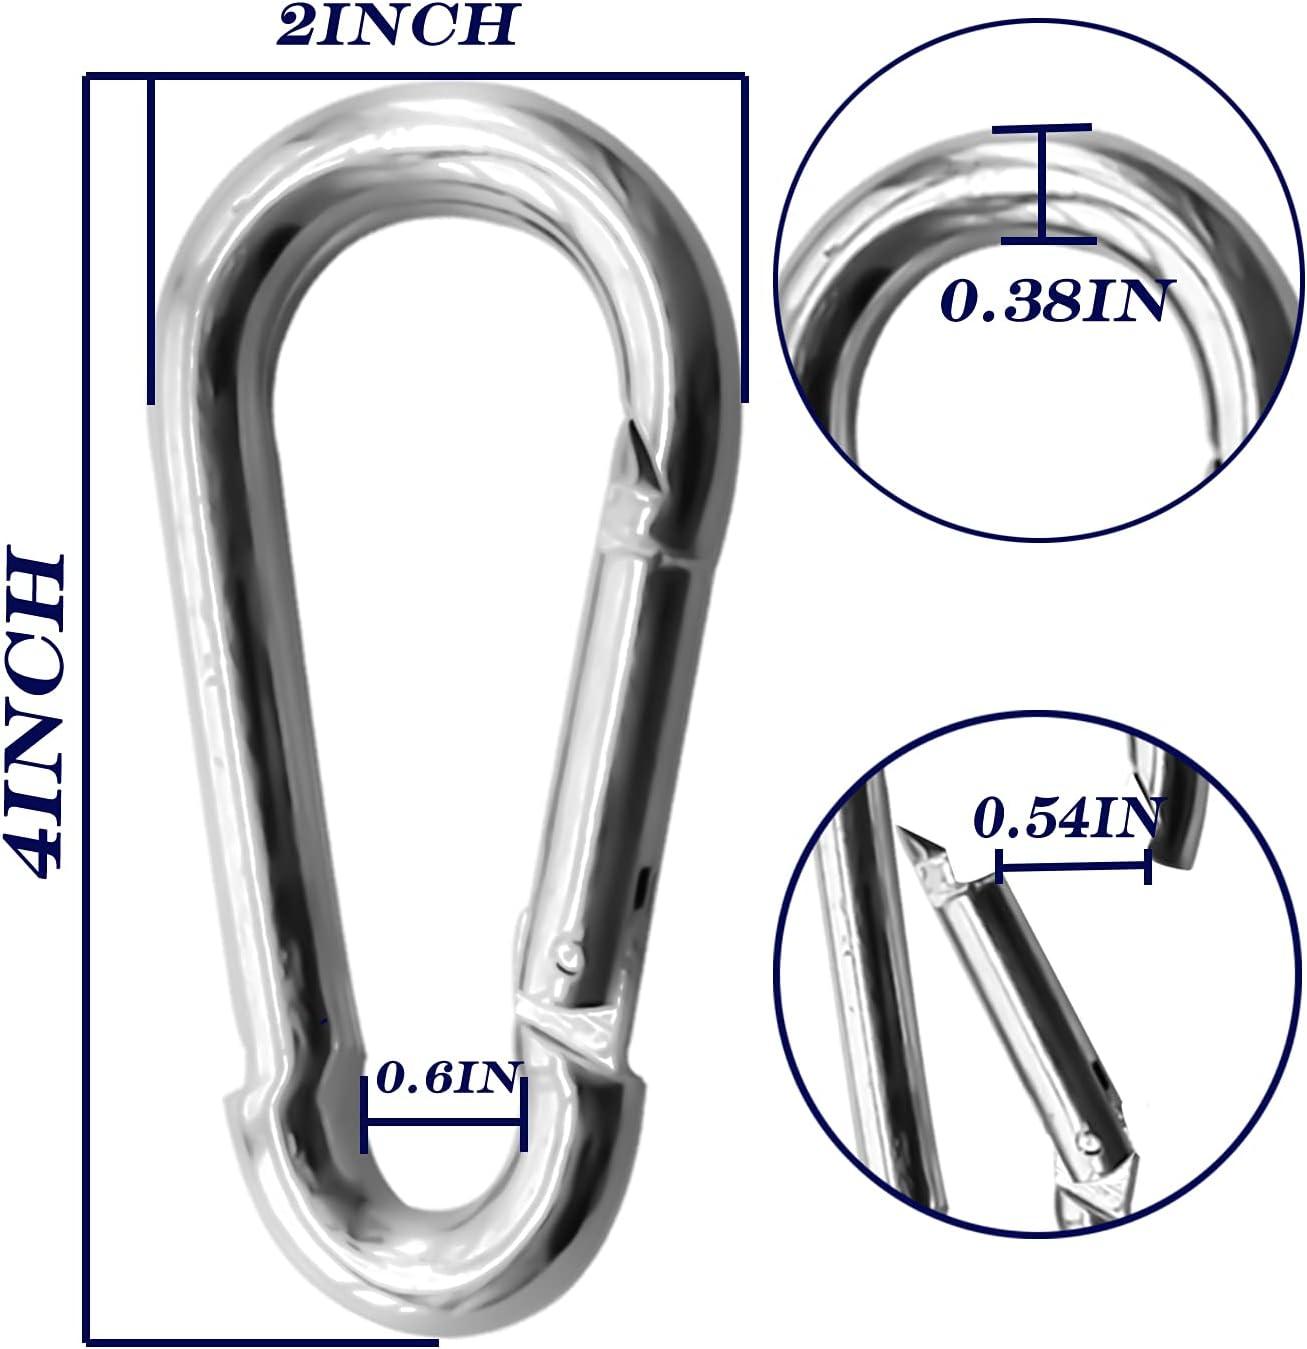  EPHECH 30PCS 3 Heavy Duty Spring Snap Hook, M8 5/16  Galvanized Steel Snap Hook Carabiner Quick Link Carabiner Clip, 500LBS  Holding Capacity Quick Link Keychain for Swing Hammock Gym Outdoor 